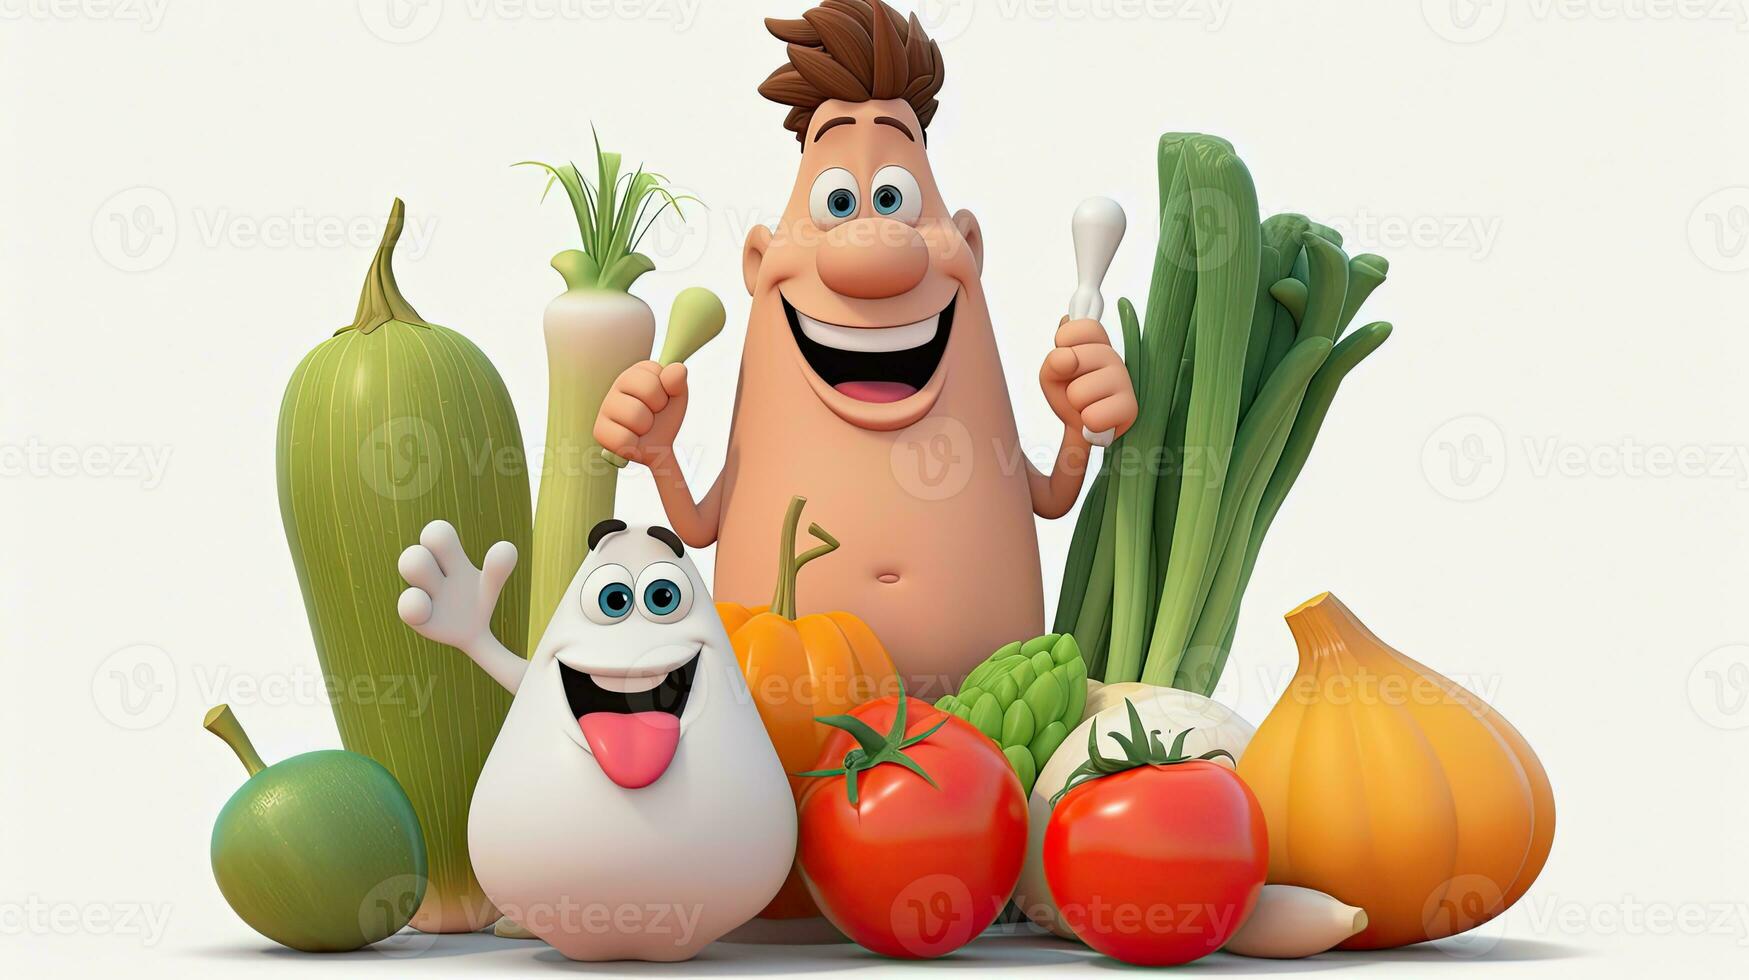 Assorted Vegetables Cartoon Characters in Pixar Style for Healthy Food. Digital Illustration. photo